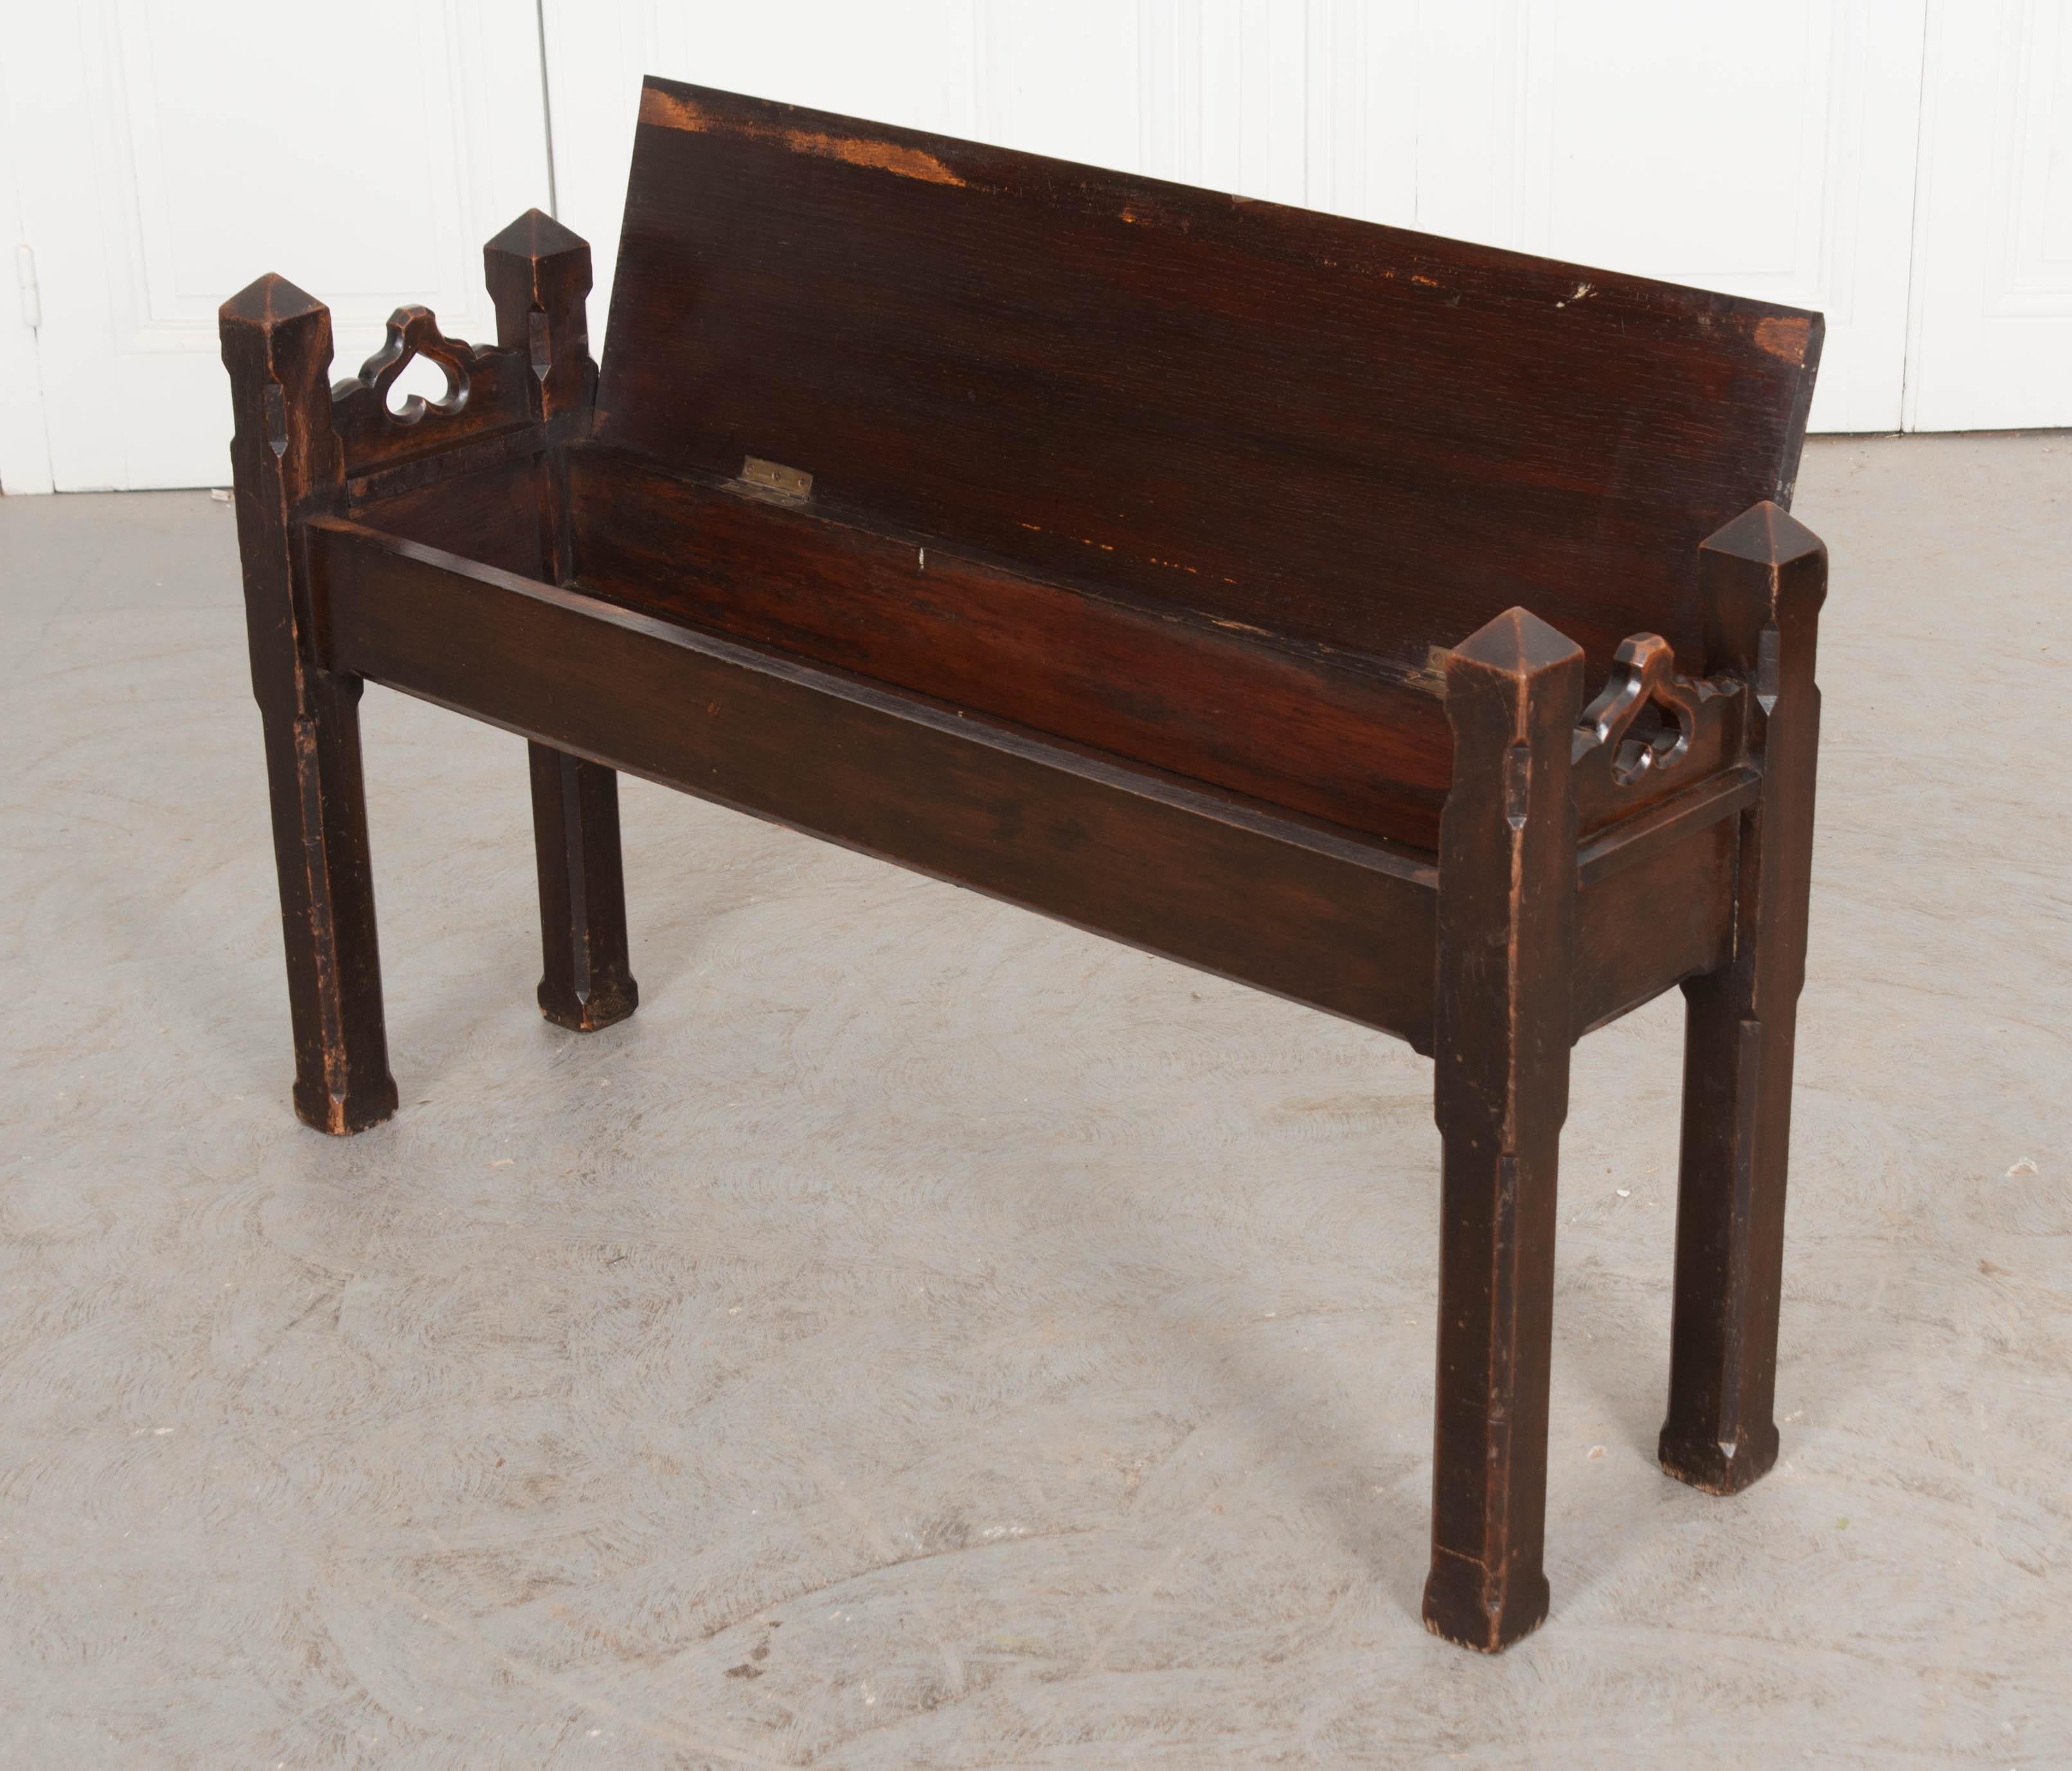 This delightful hand carved Gothic Revival oak storage bench, circa 1840s, is from England and features sweet inverted hearts in the side rails and chamfered legs. Diminutive in scale, yet multipurpose, as the seat lifts back to reveal a nicely